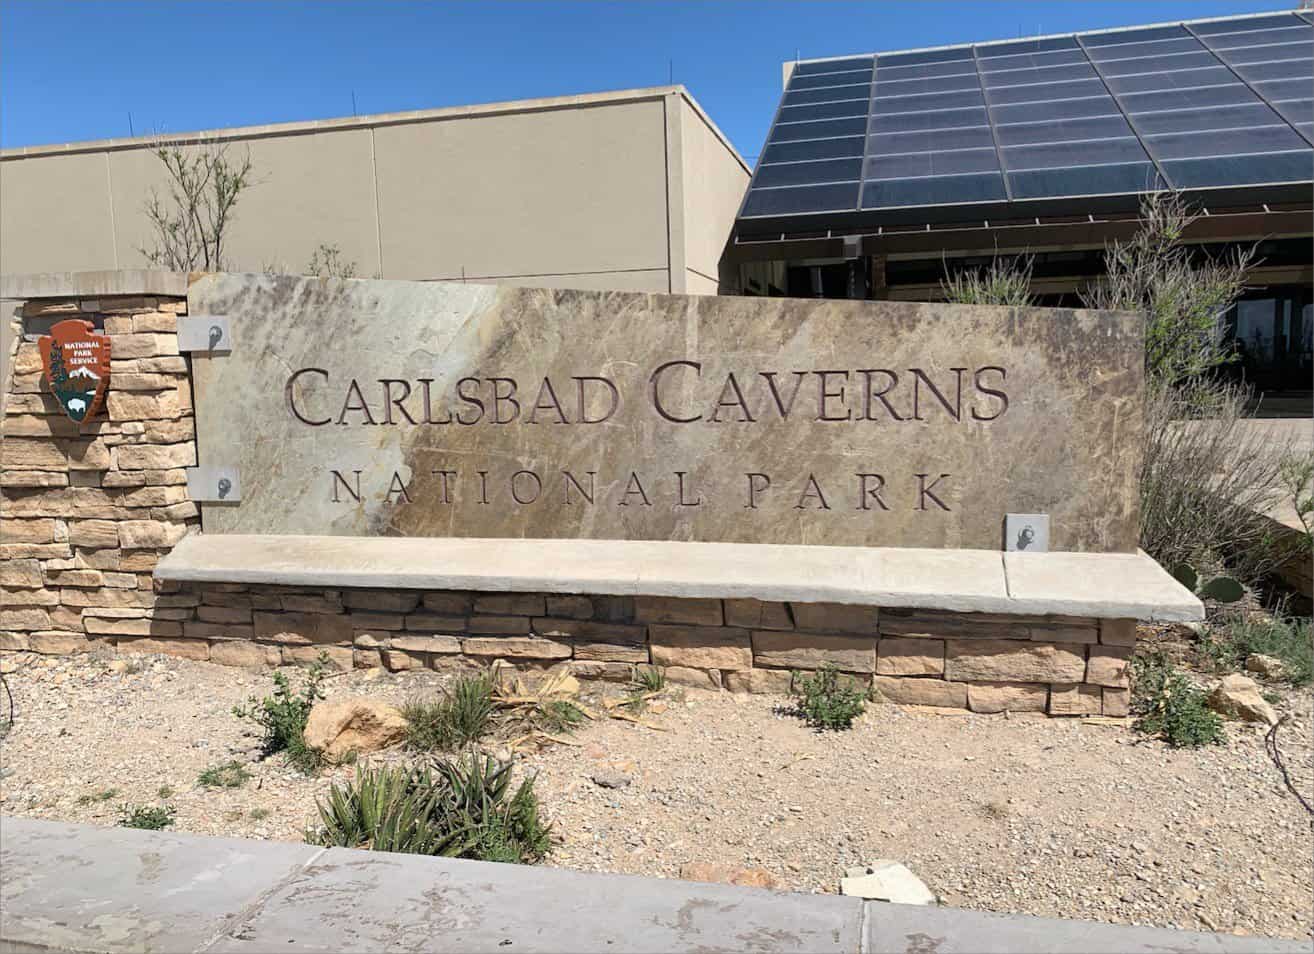 A sign for Carlsbad Caverns National Park.